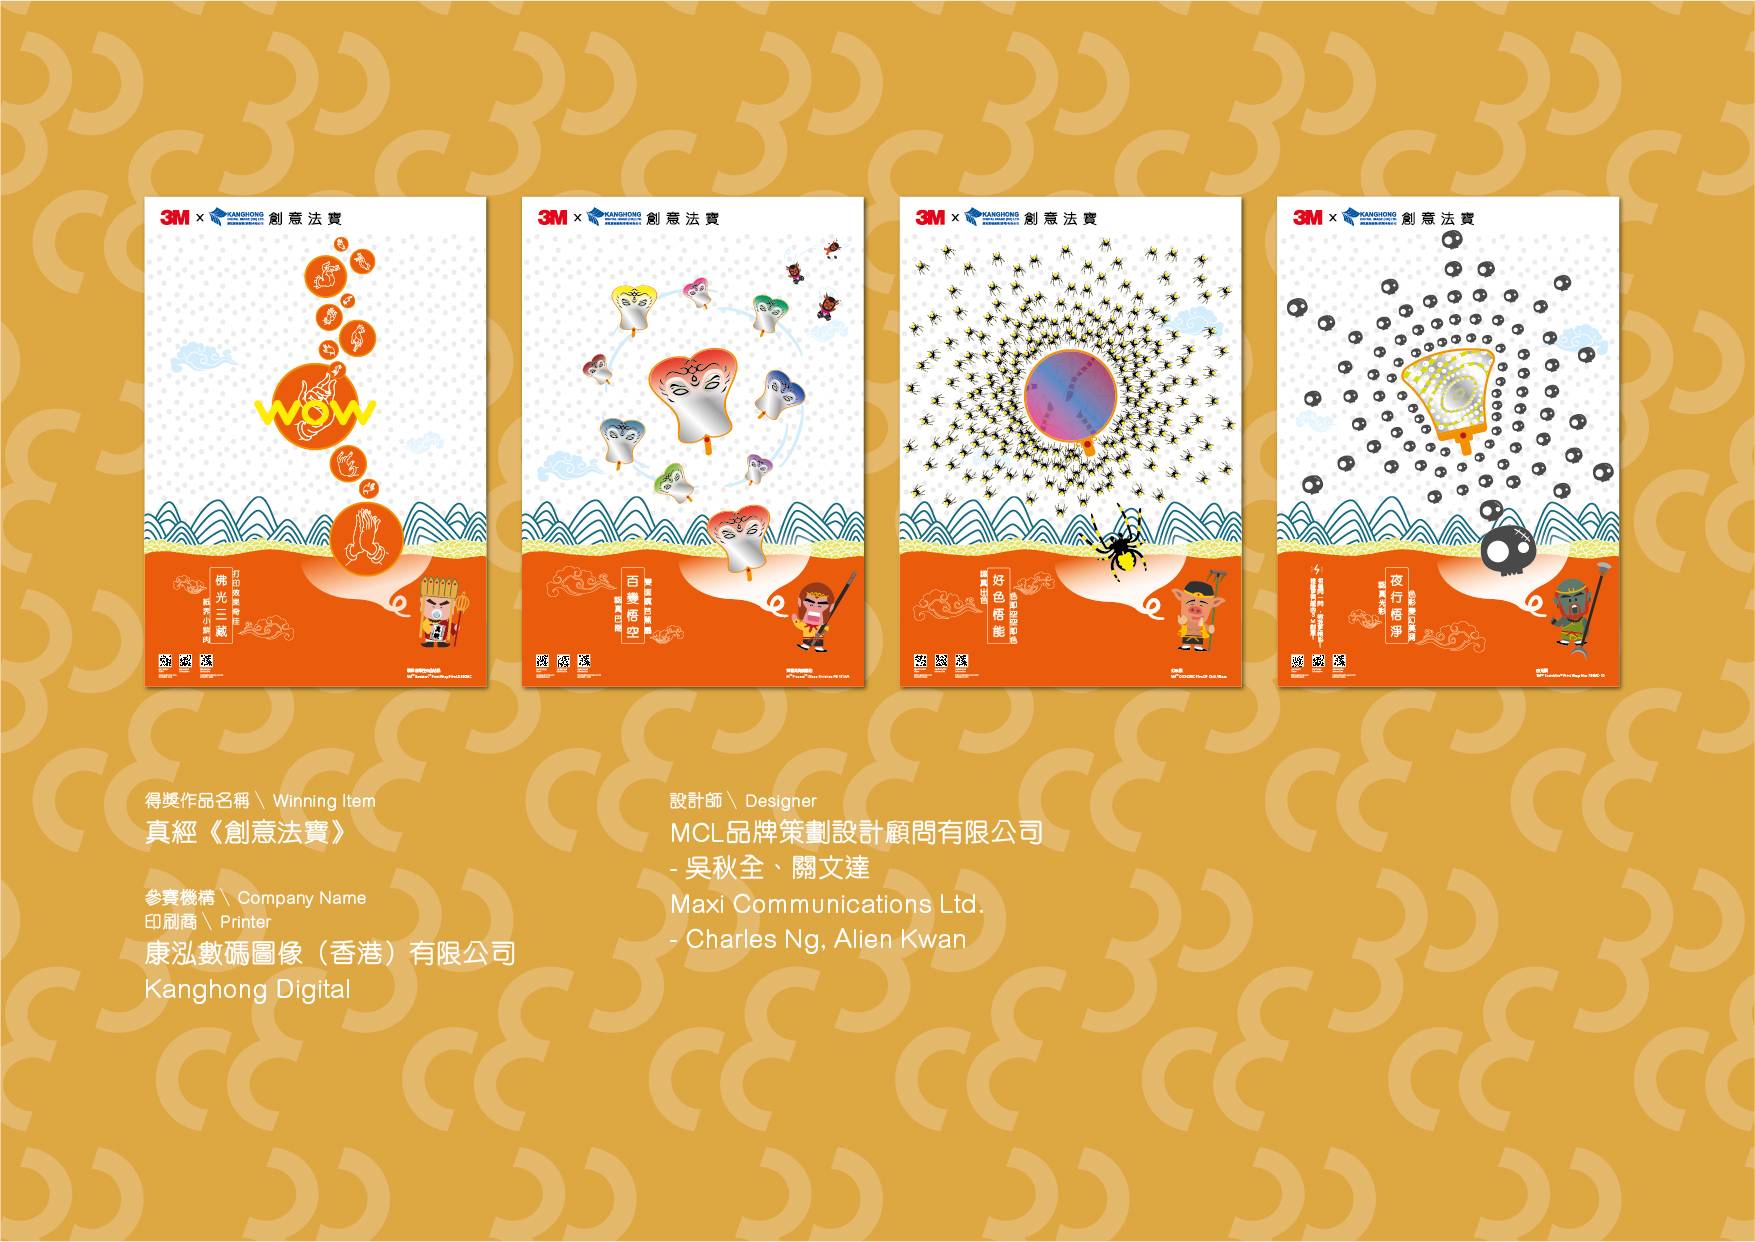 3M posters for new paper product launch concept for THE 30TH Hong Kong Print Awards 2018 Award-winning works